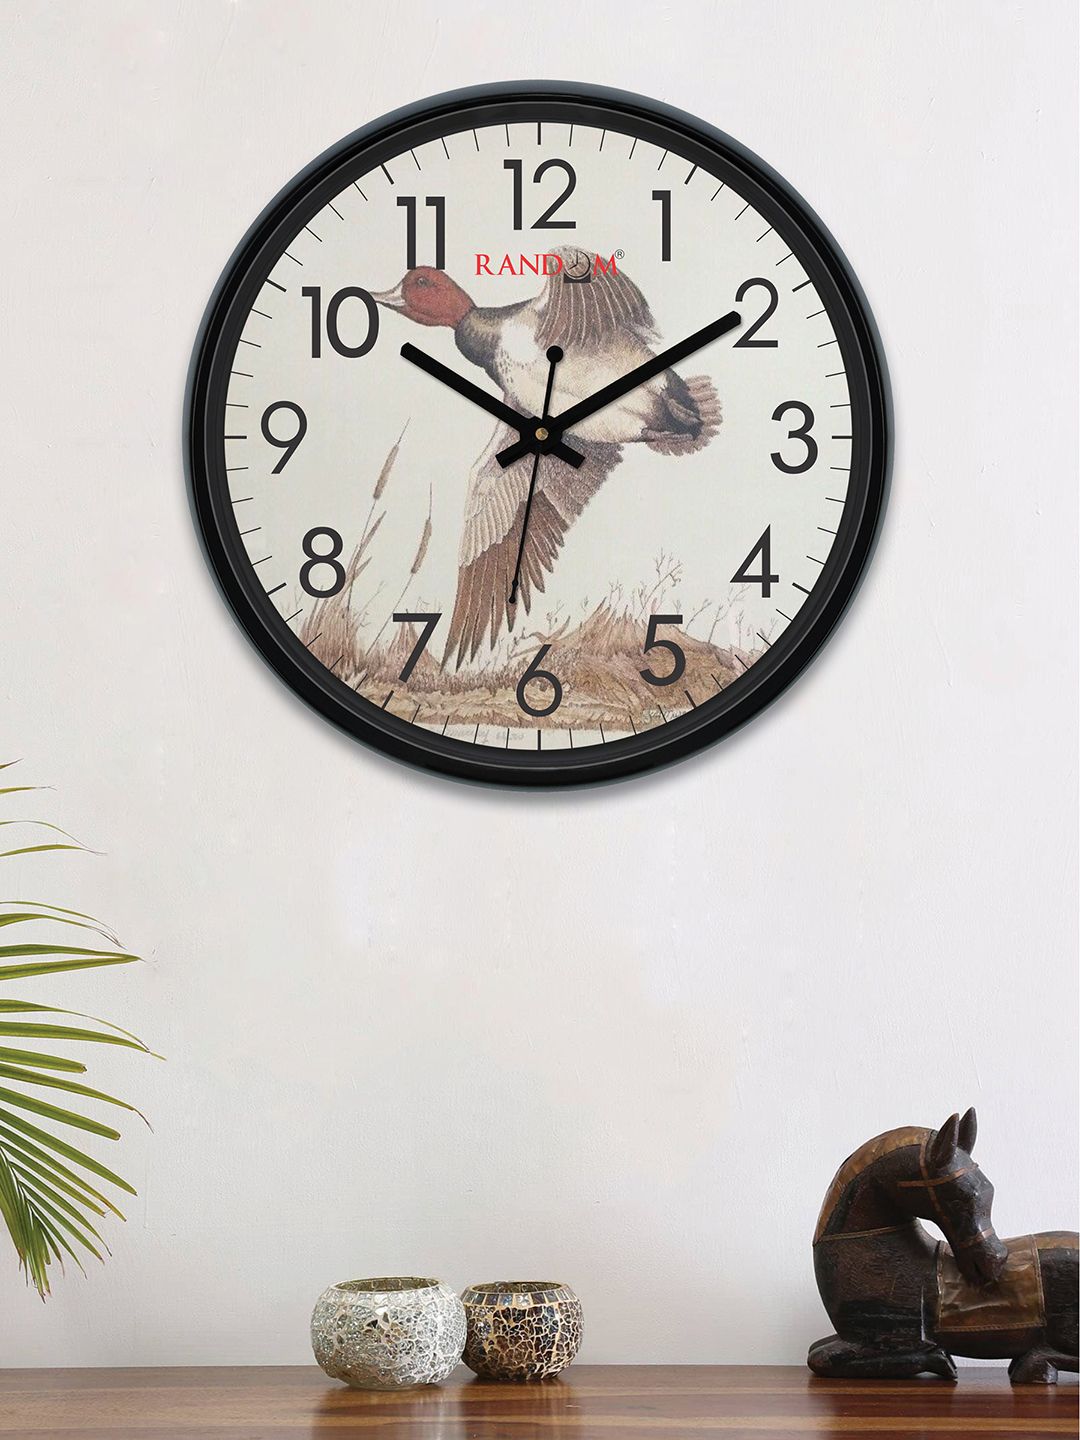 RANDOM Off-White & Brown Round Printed 30 cm Analogue Wall Clock Price in India